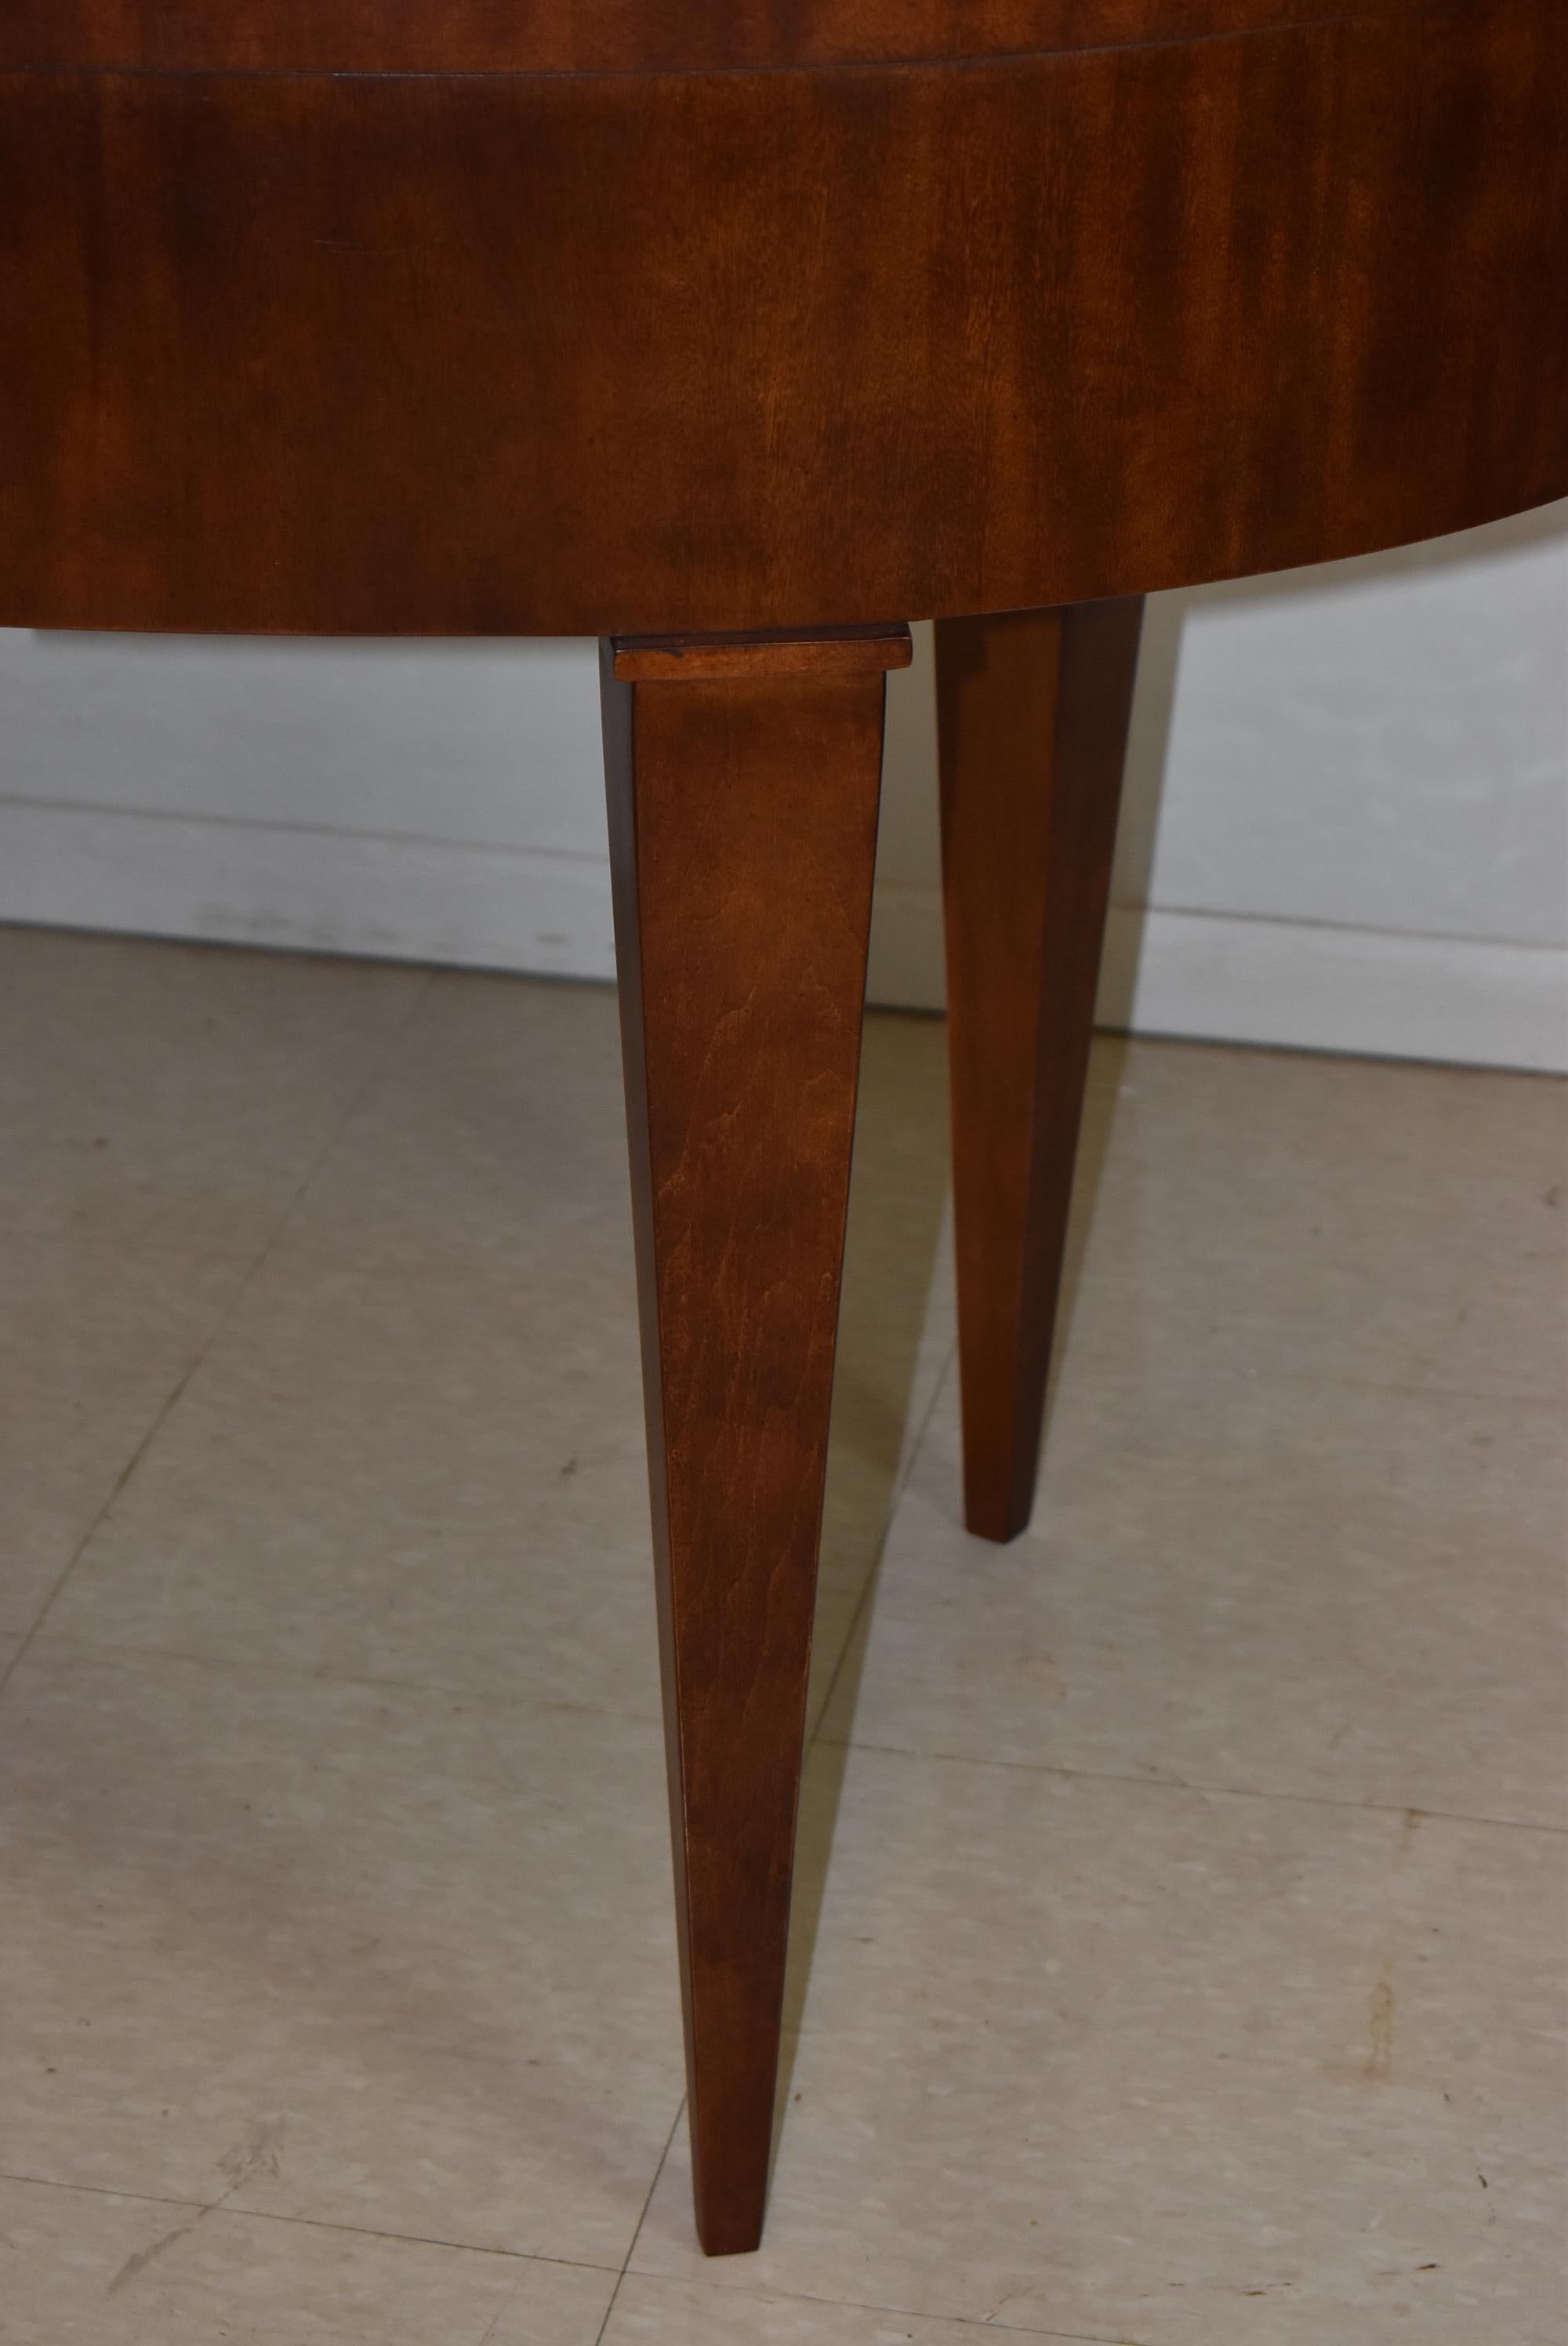 Great design oval burl wood and mahogany contemporary desk by Hickory White Furniture. Stylized tapered legs. Very nice to excellent condition. 62.5